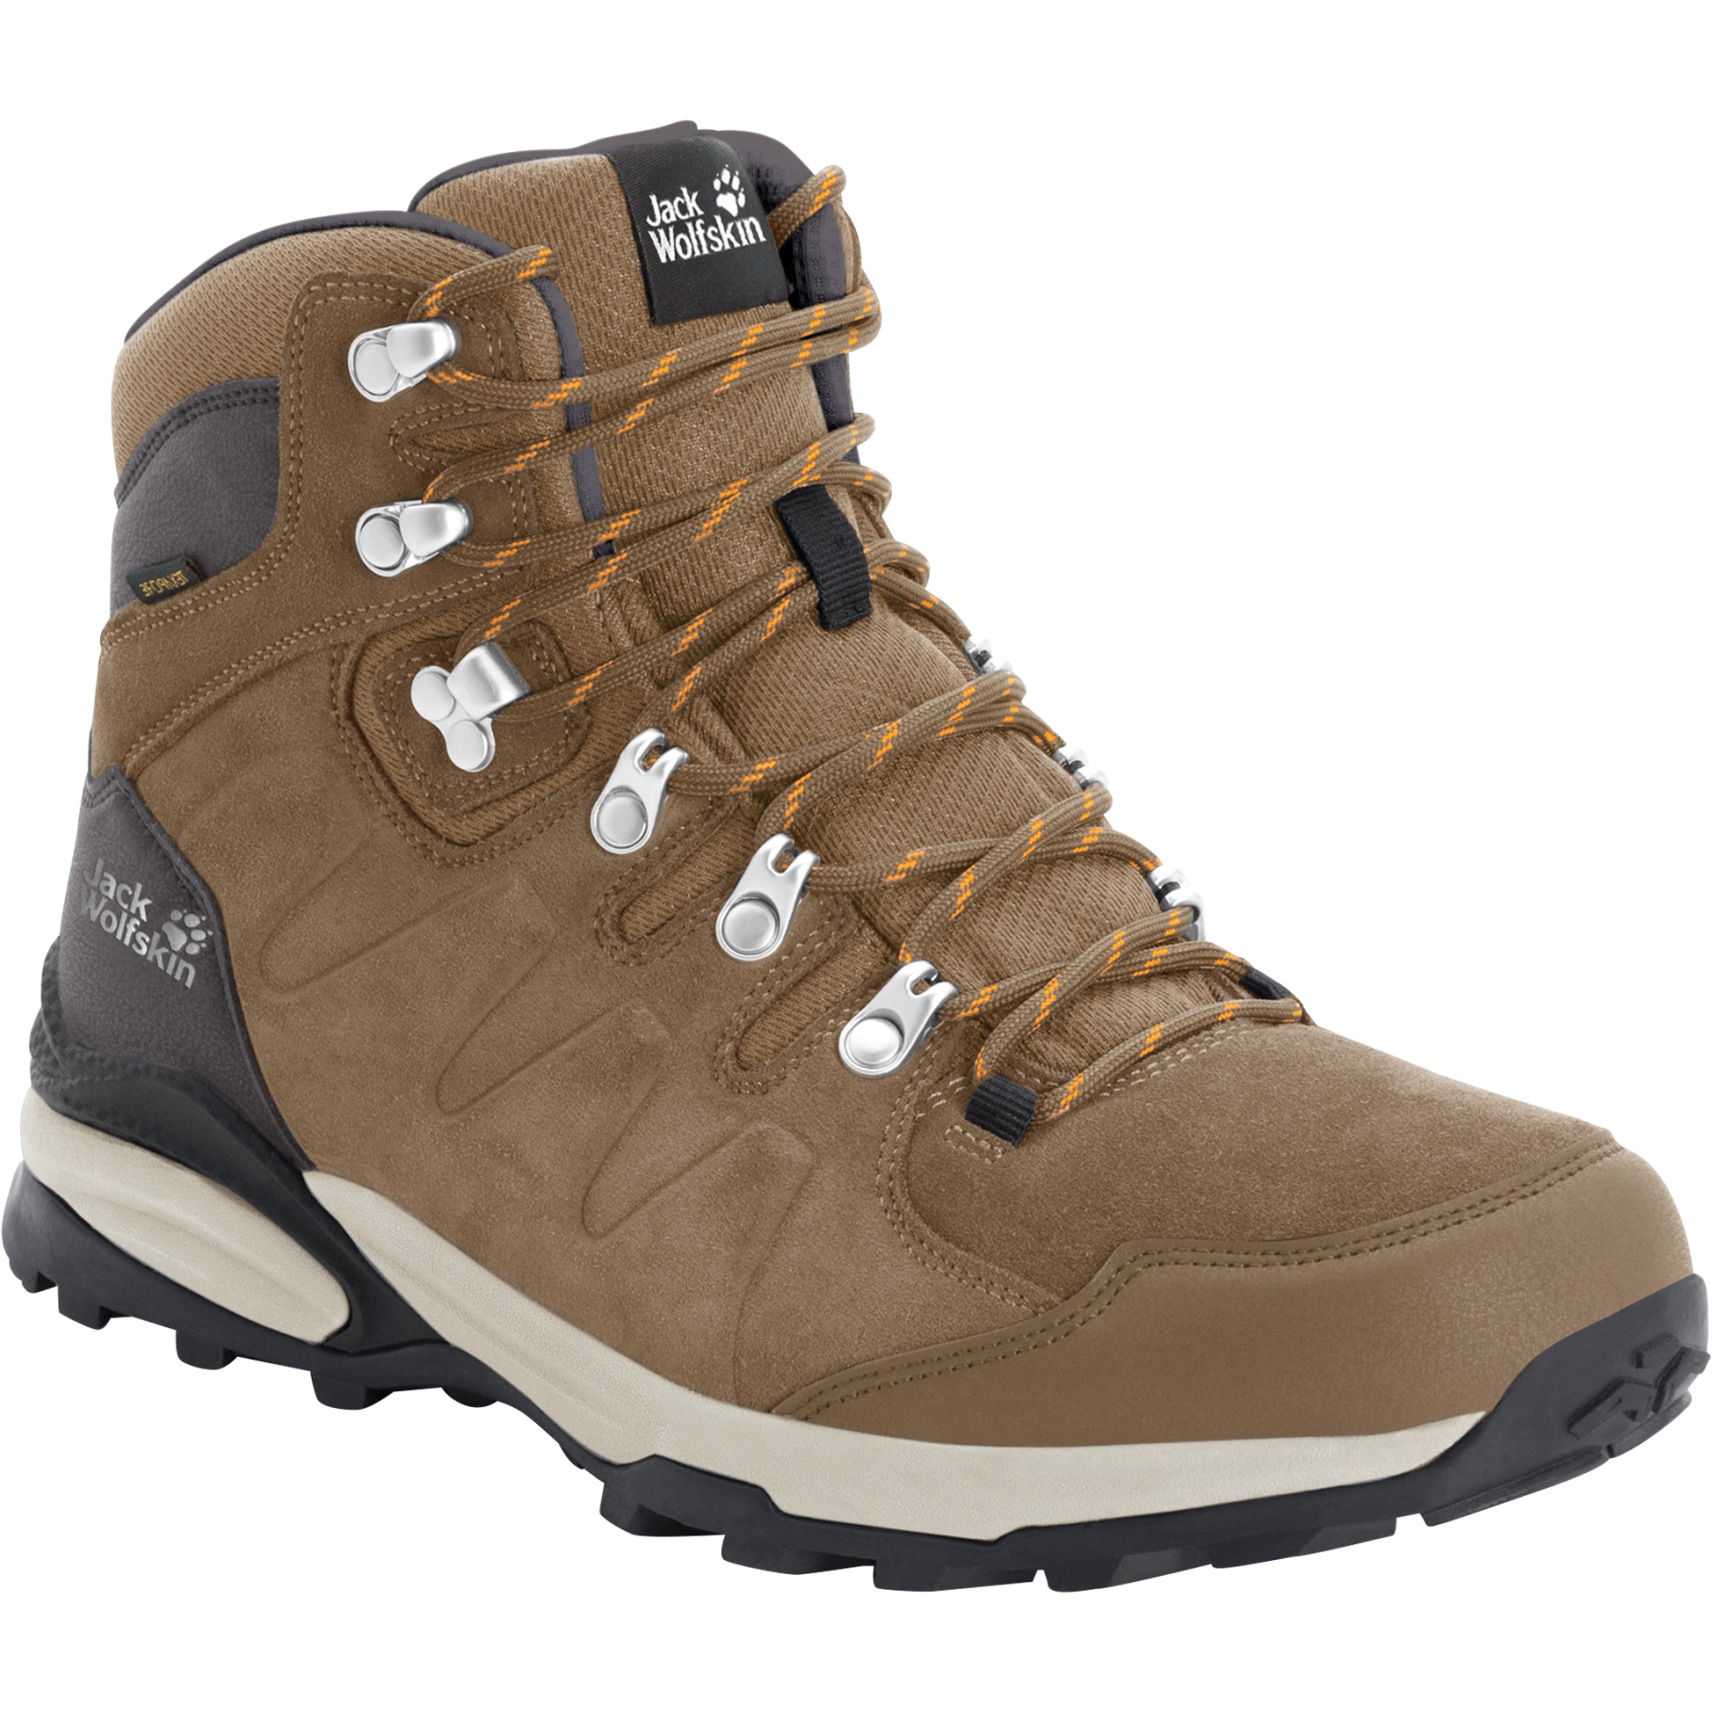 Picture of Jack Wolfskin Refugio Texapore Mid Hiking Boots Women - brown / apricot